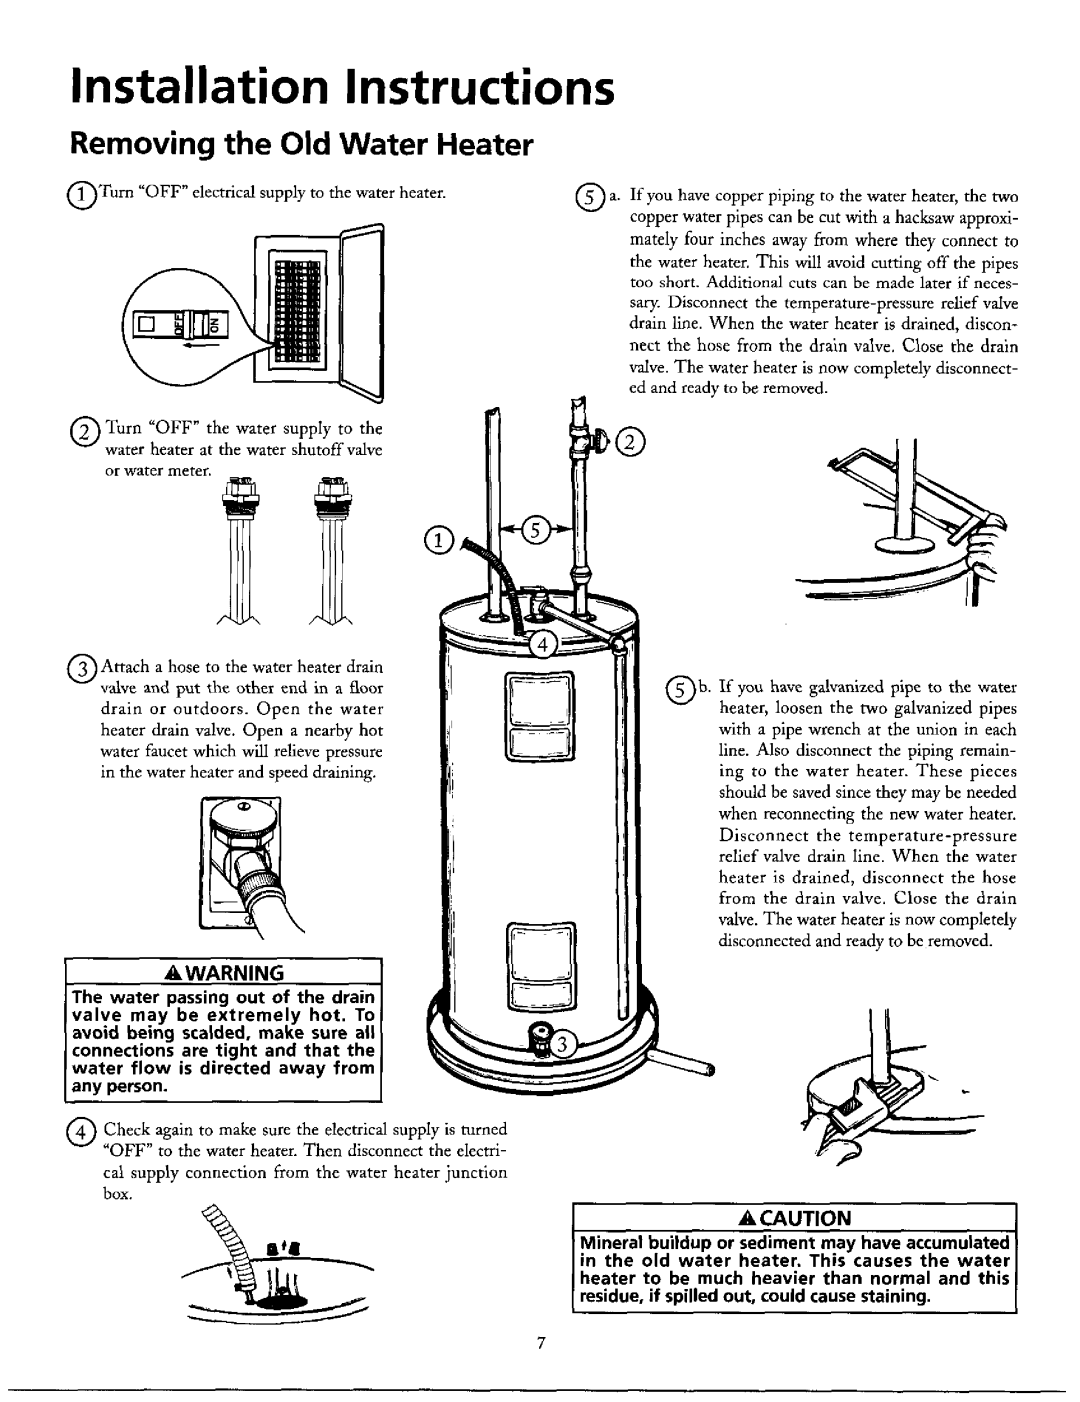 Maytag HE21282T, HE31250T, HE31250S, HE31282T, HE31240S, HE21240S Installation Instructions, Removing the Old Water Heater 